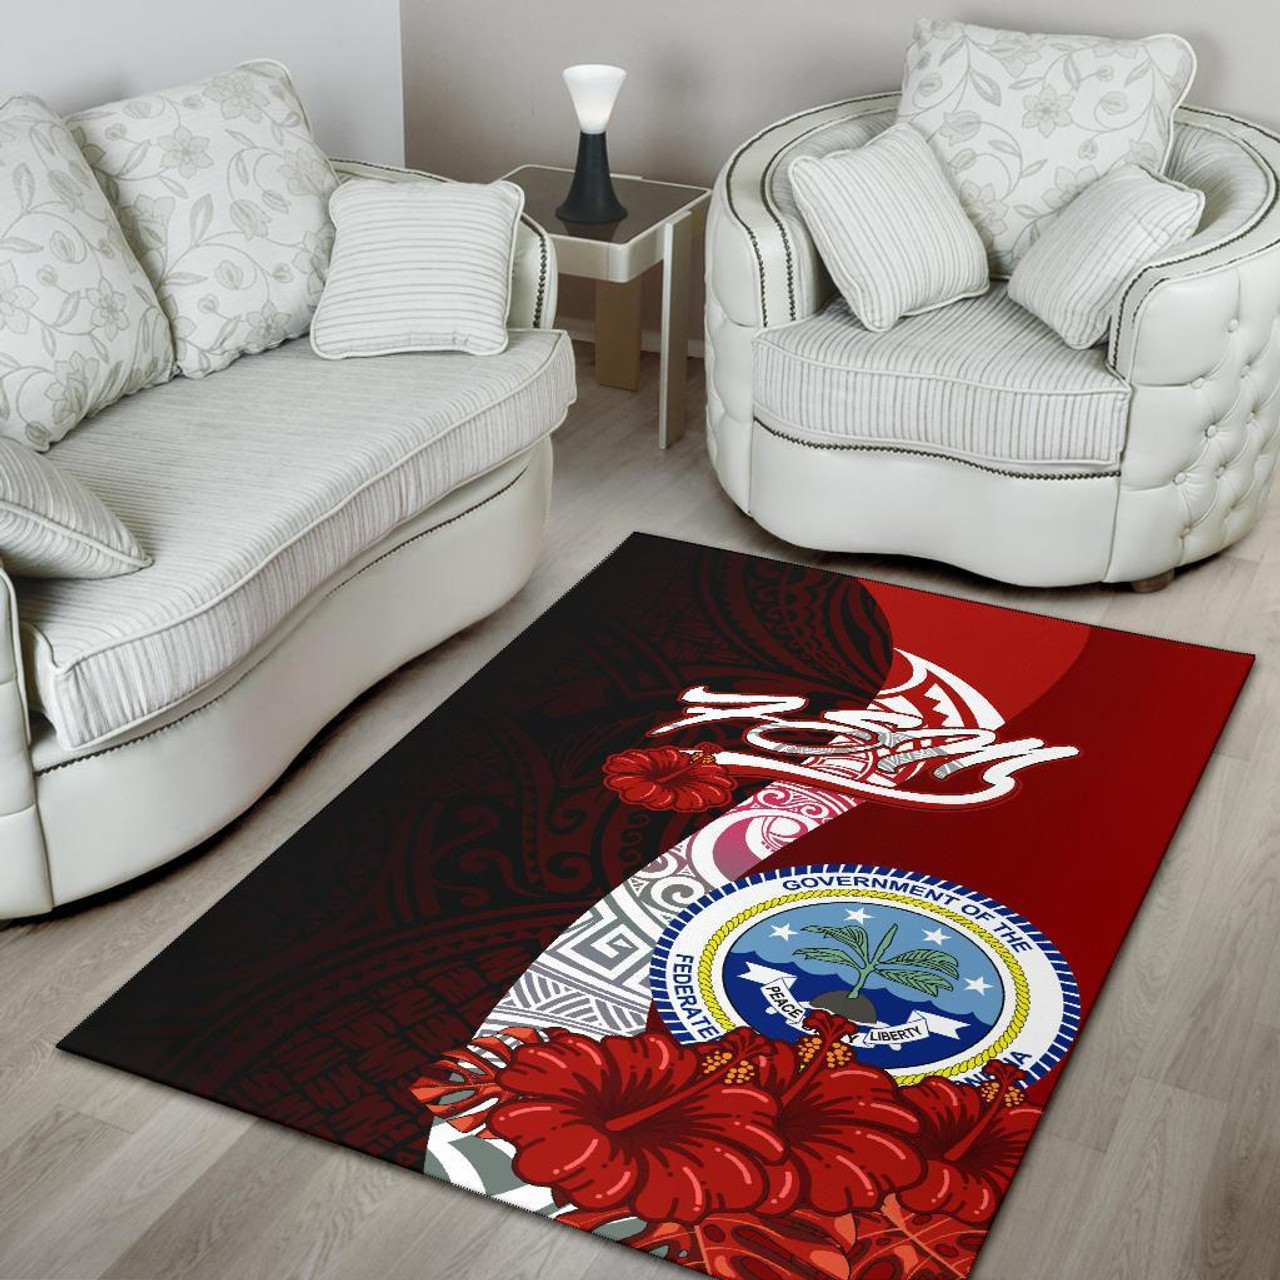 Federated States Of Micronesia Polynesian Area Rug - Coat Of Arm With Hibiscus Polynesian 4